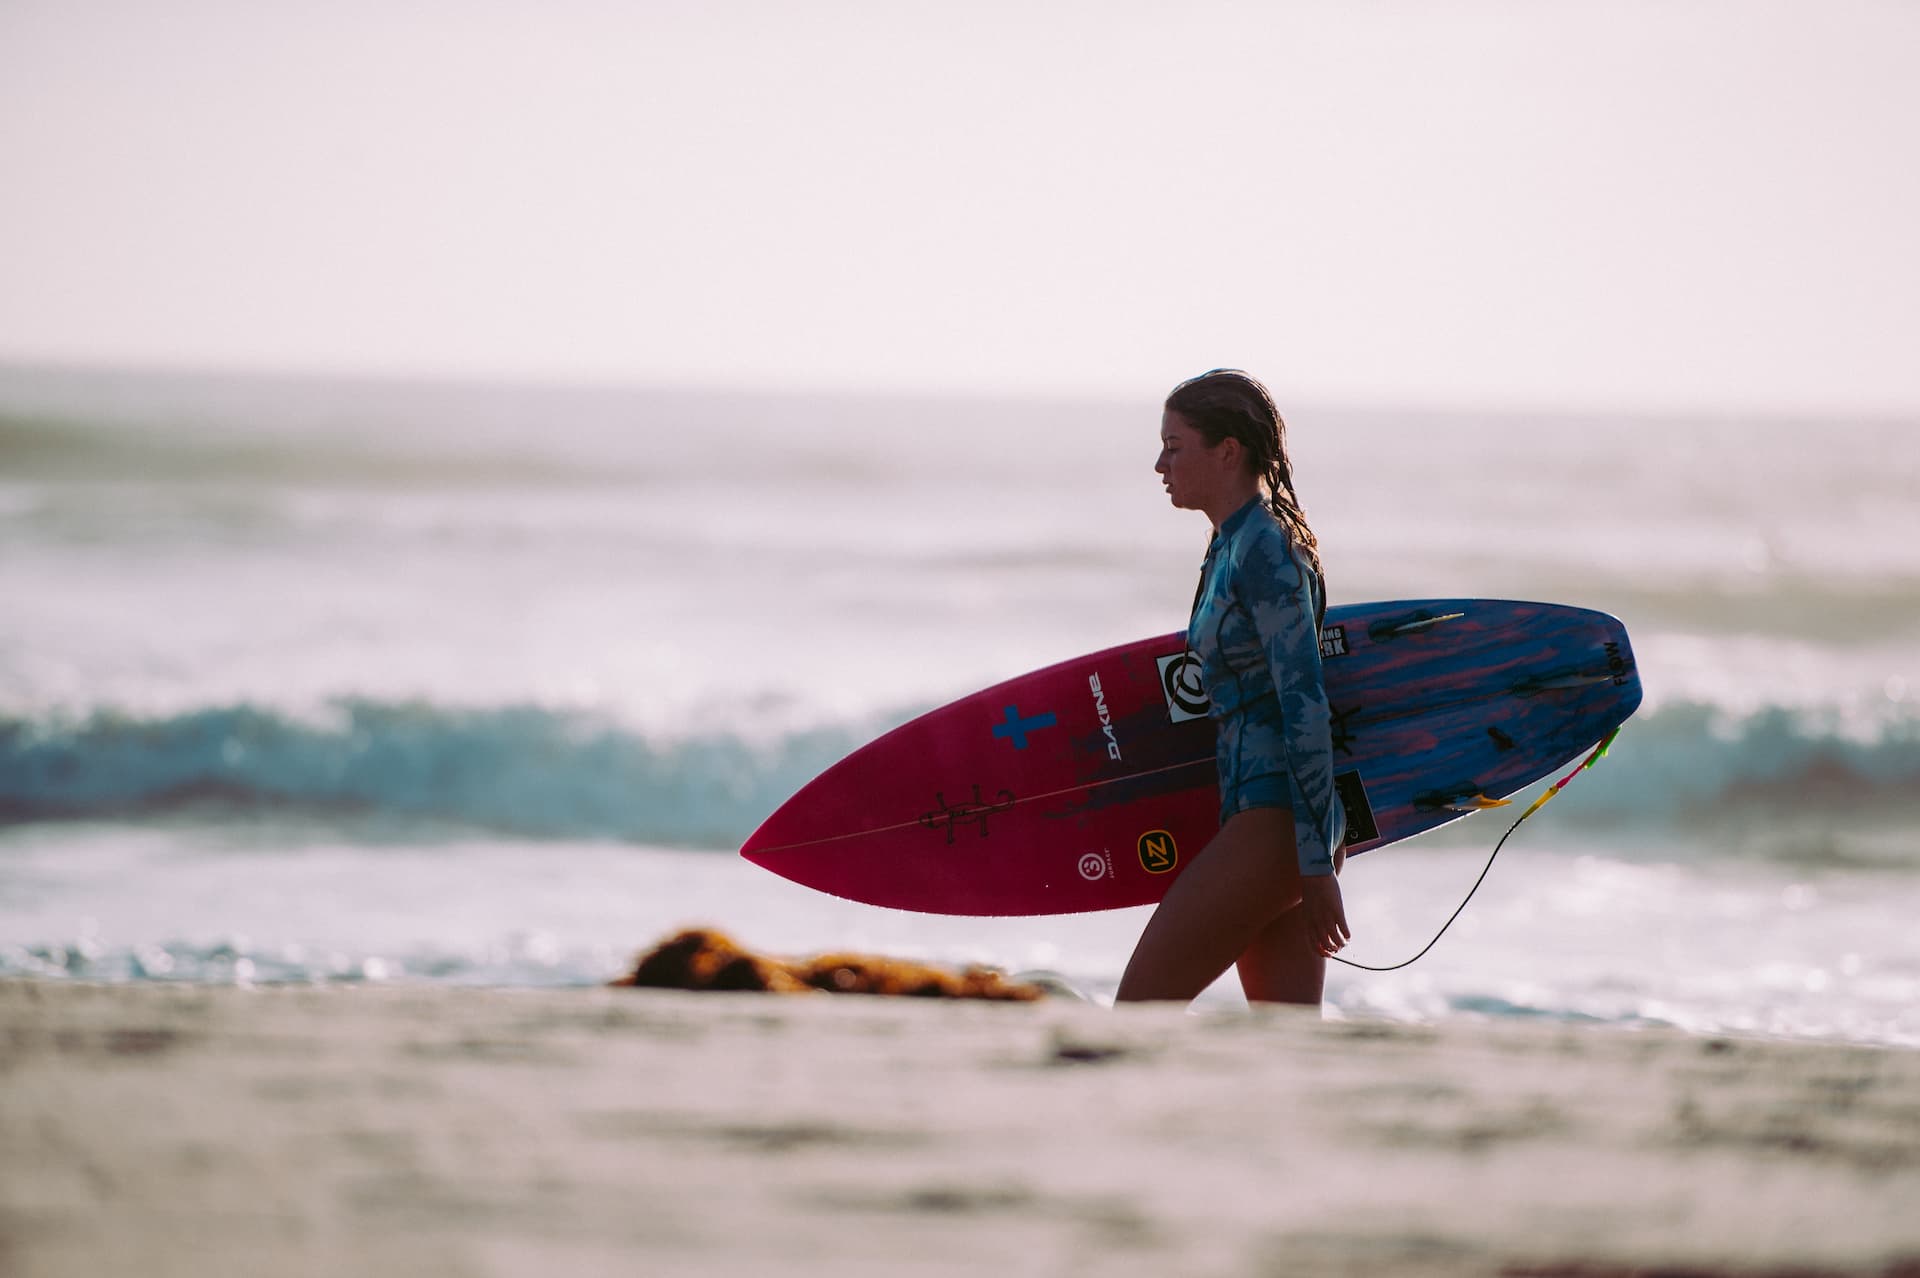 What are the negative effects of surfing?